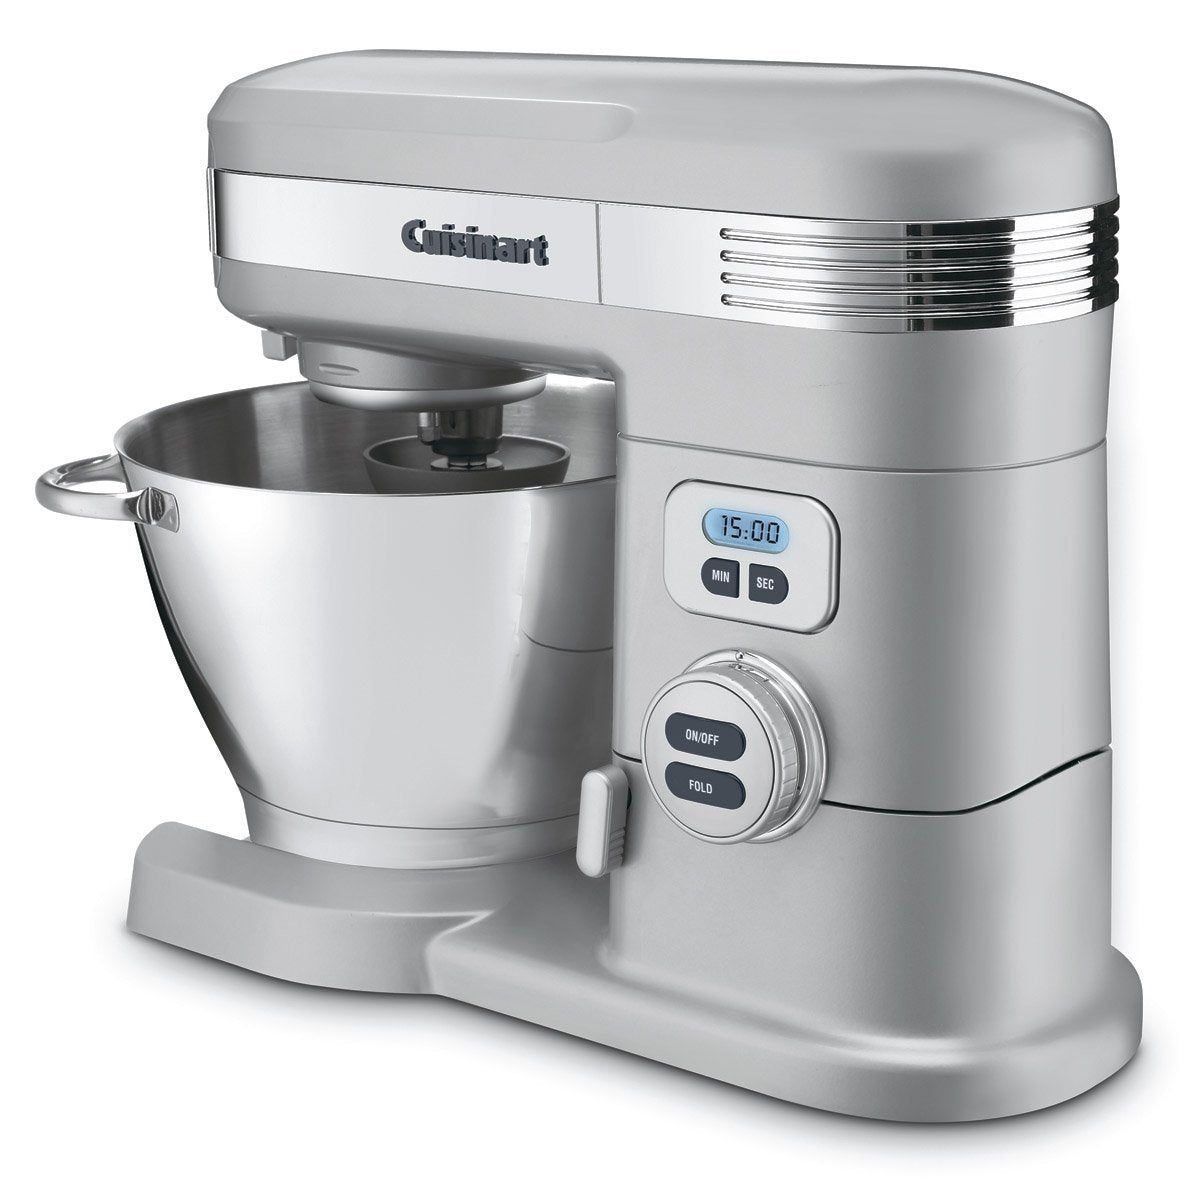 Cuisinart SM-55BC Stand Mixer with 3-Power Ports, Brushed Chrome, 5.5 Quart